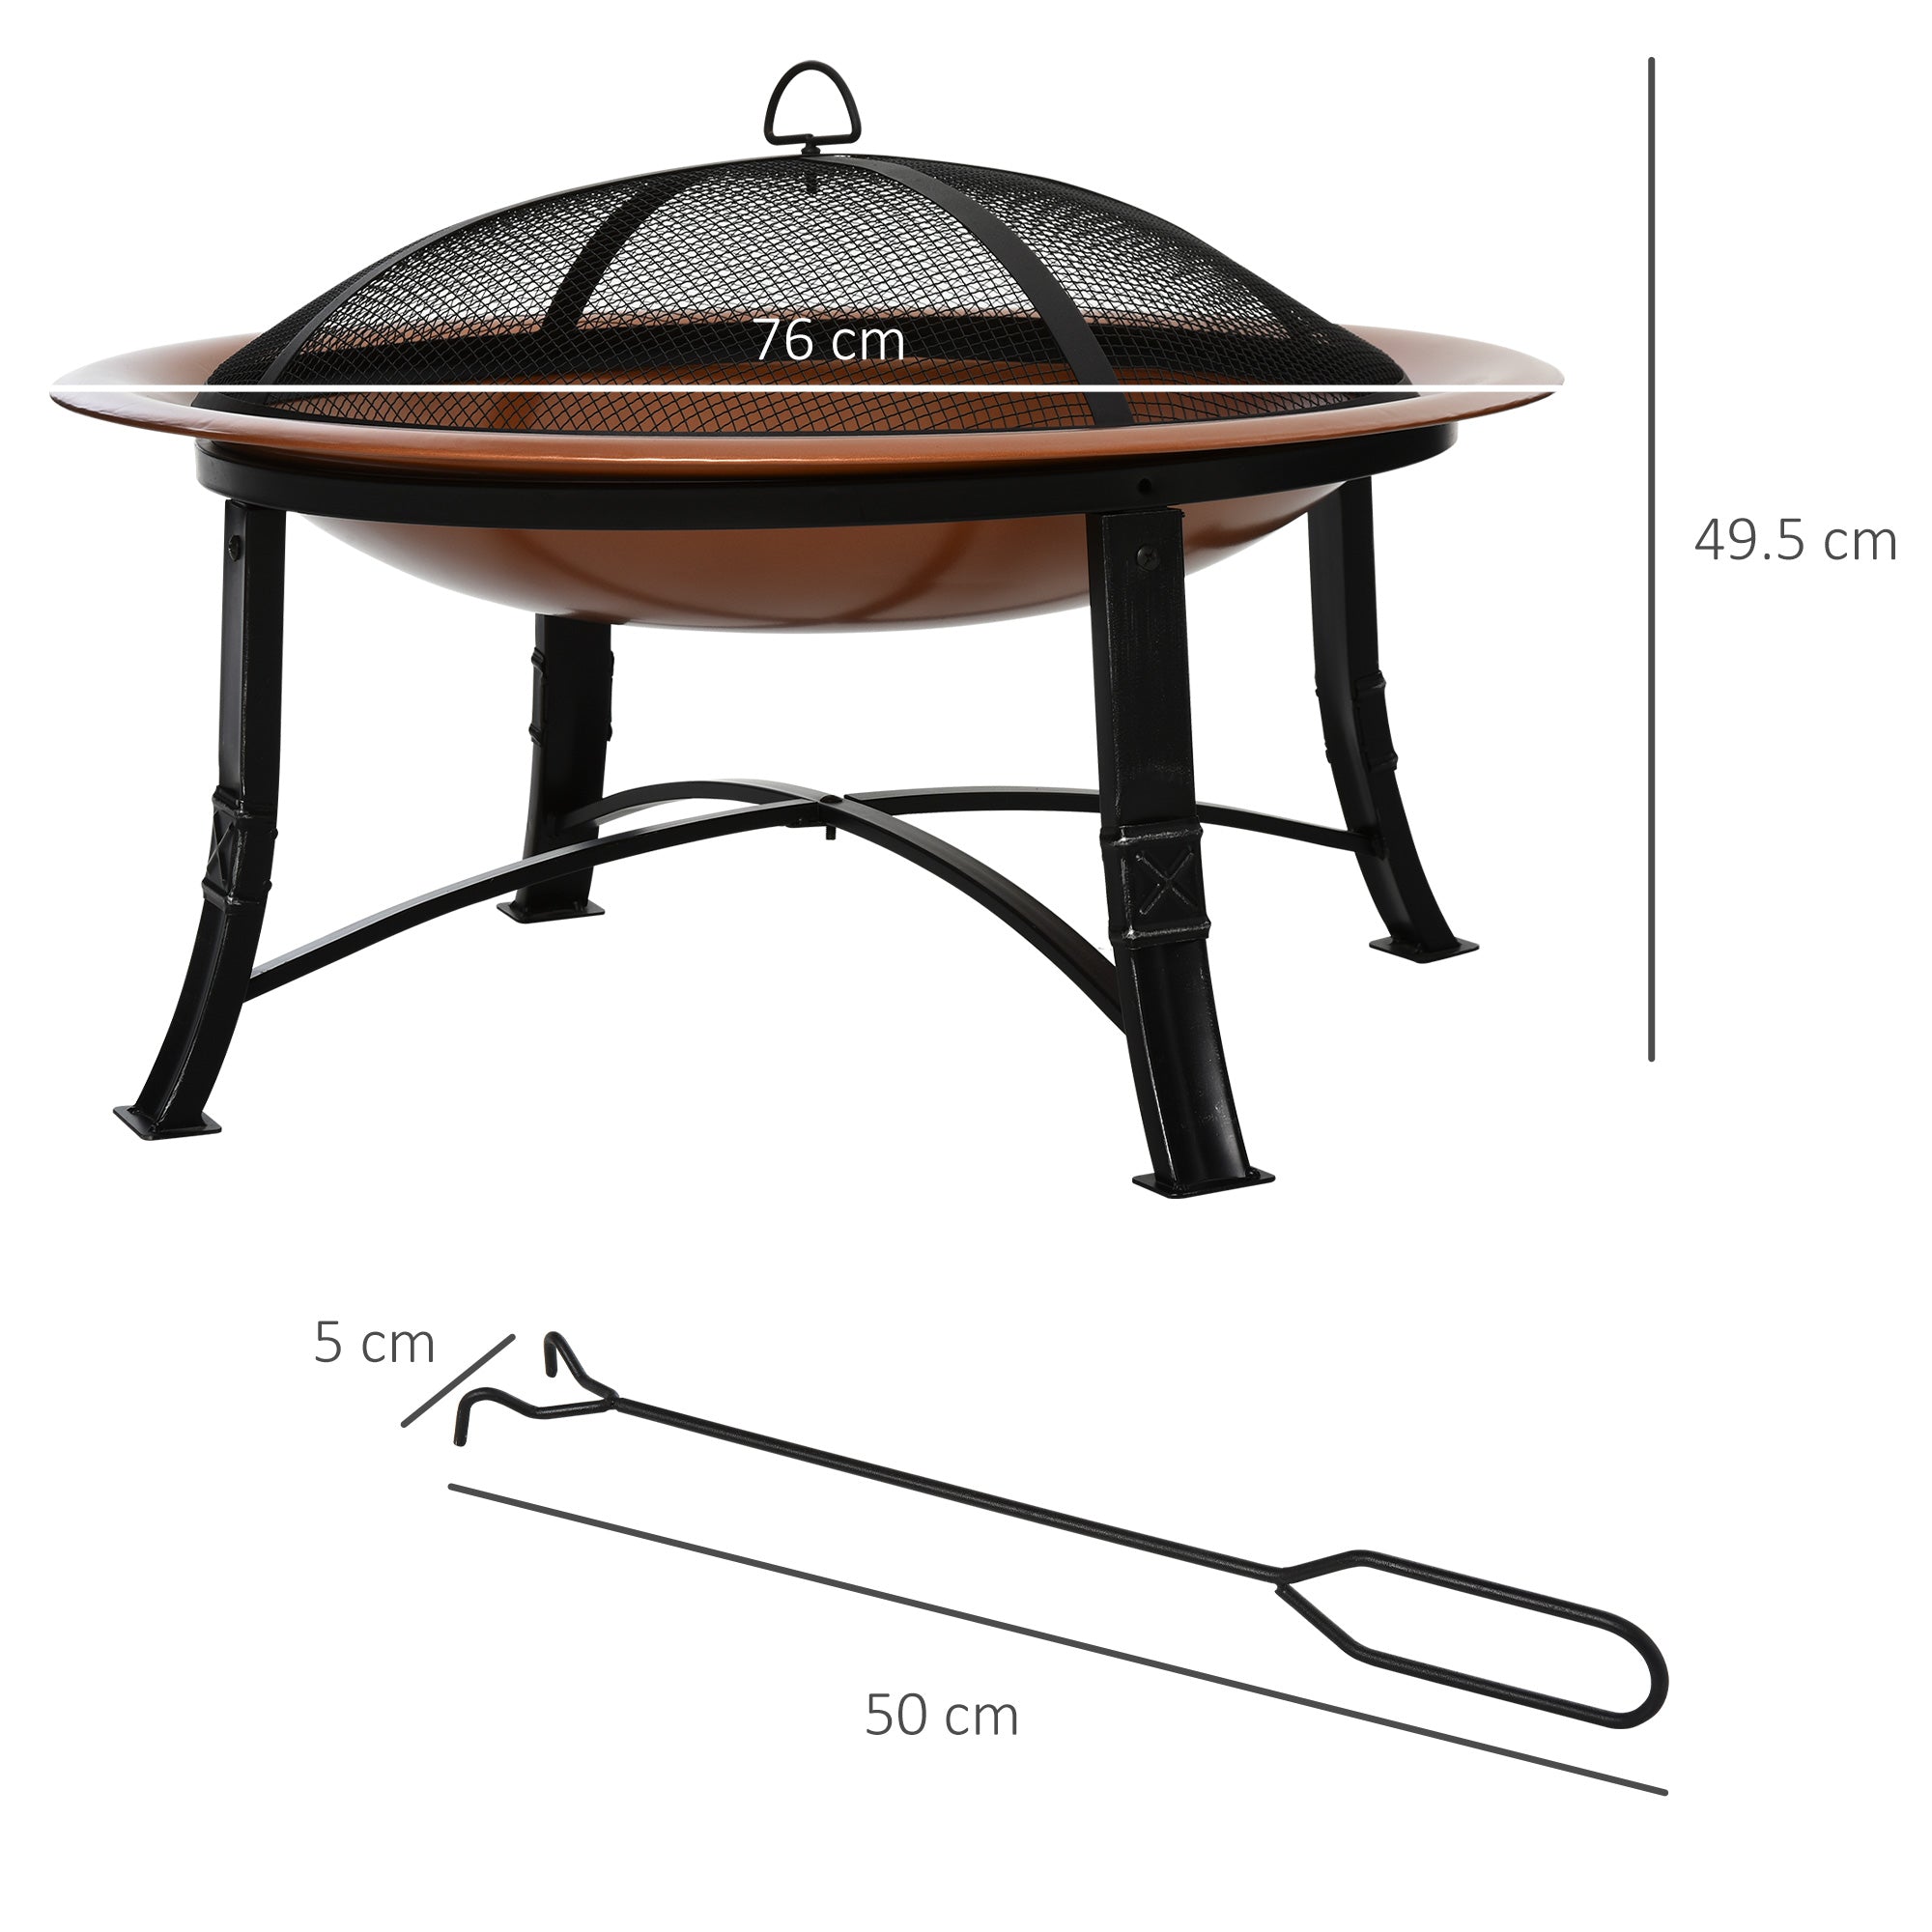 Outsunny Metal Large Firepit Bowl Outdoor Round Fire Pit w/ Lid, Log Grate, Poker for Backyard, Camping, Picnic, Bonfire, 76 x 76 x 49.5cm, Bronze